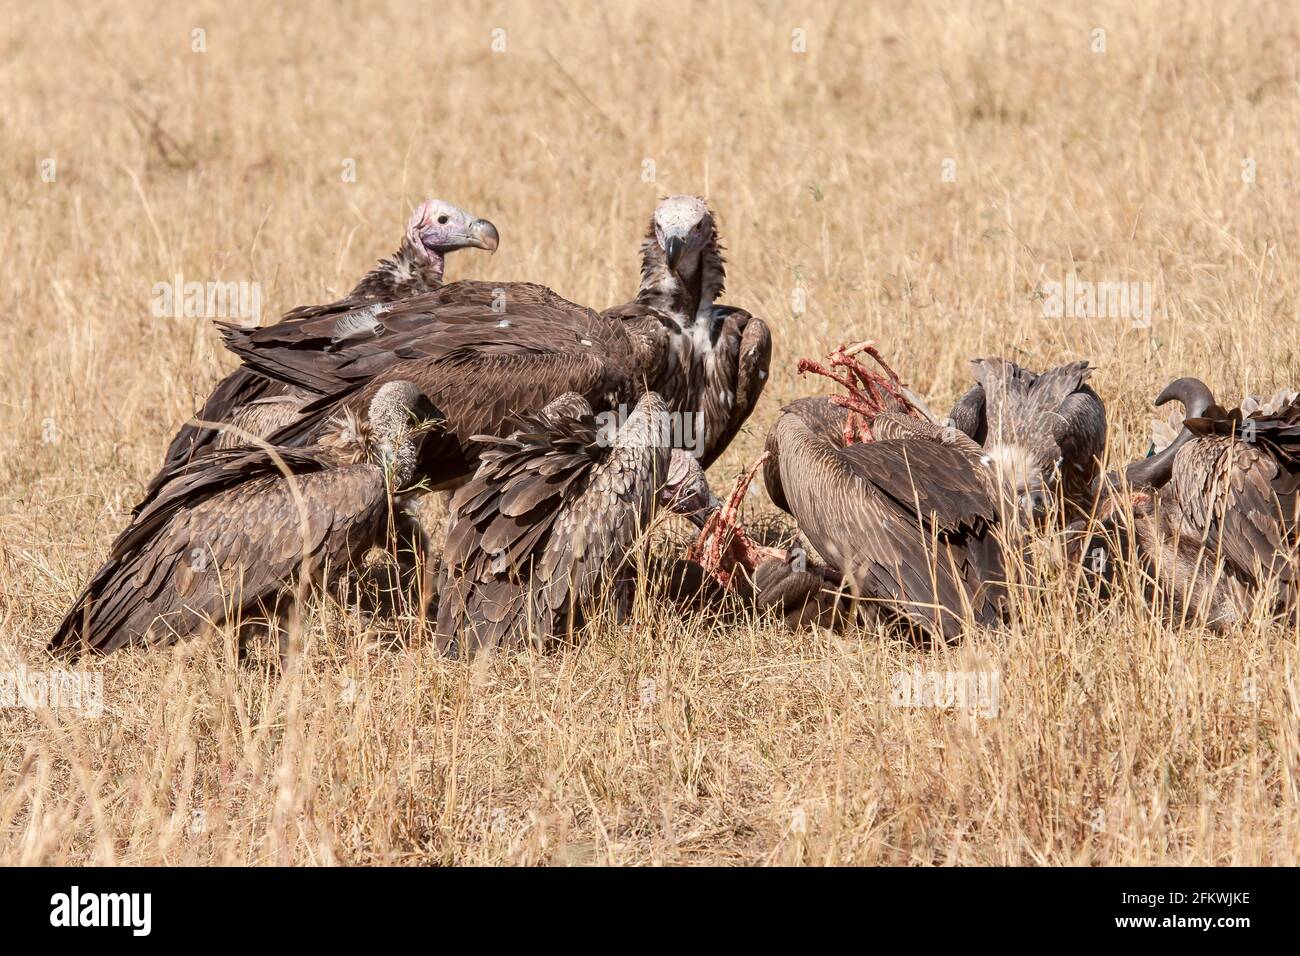 lappet-faced vulture or Nubian vulture, Torgos tracheliotos, two birds feeding on carcass with other vultures, Masai Mara, Kenya, East Africa Stock Photo